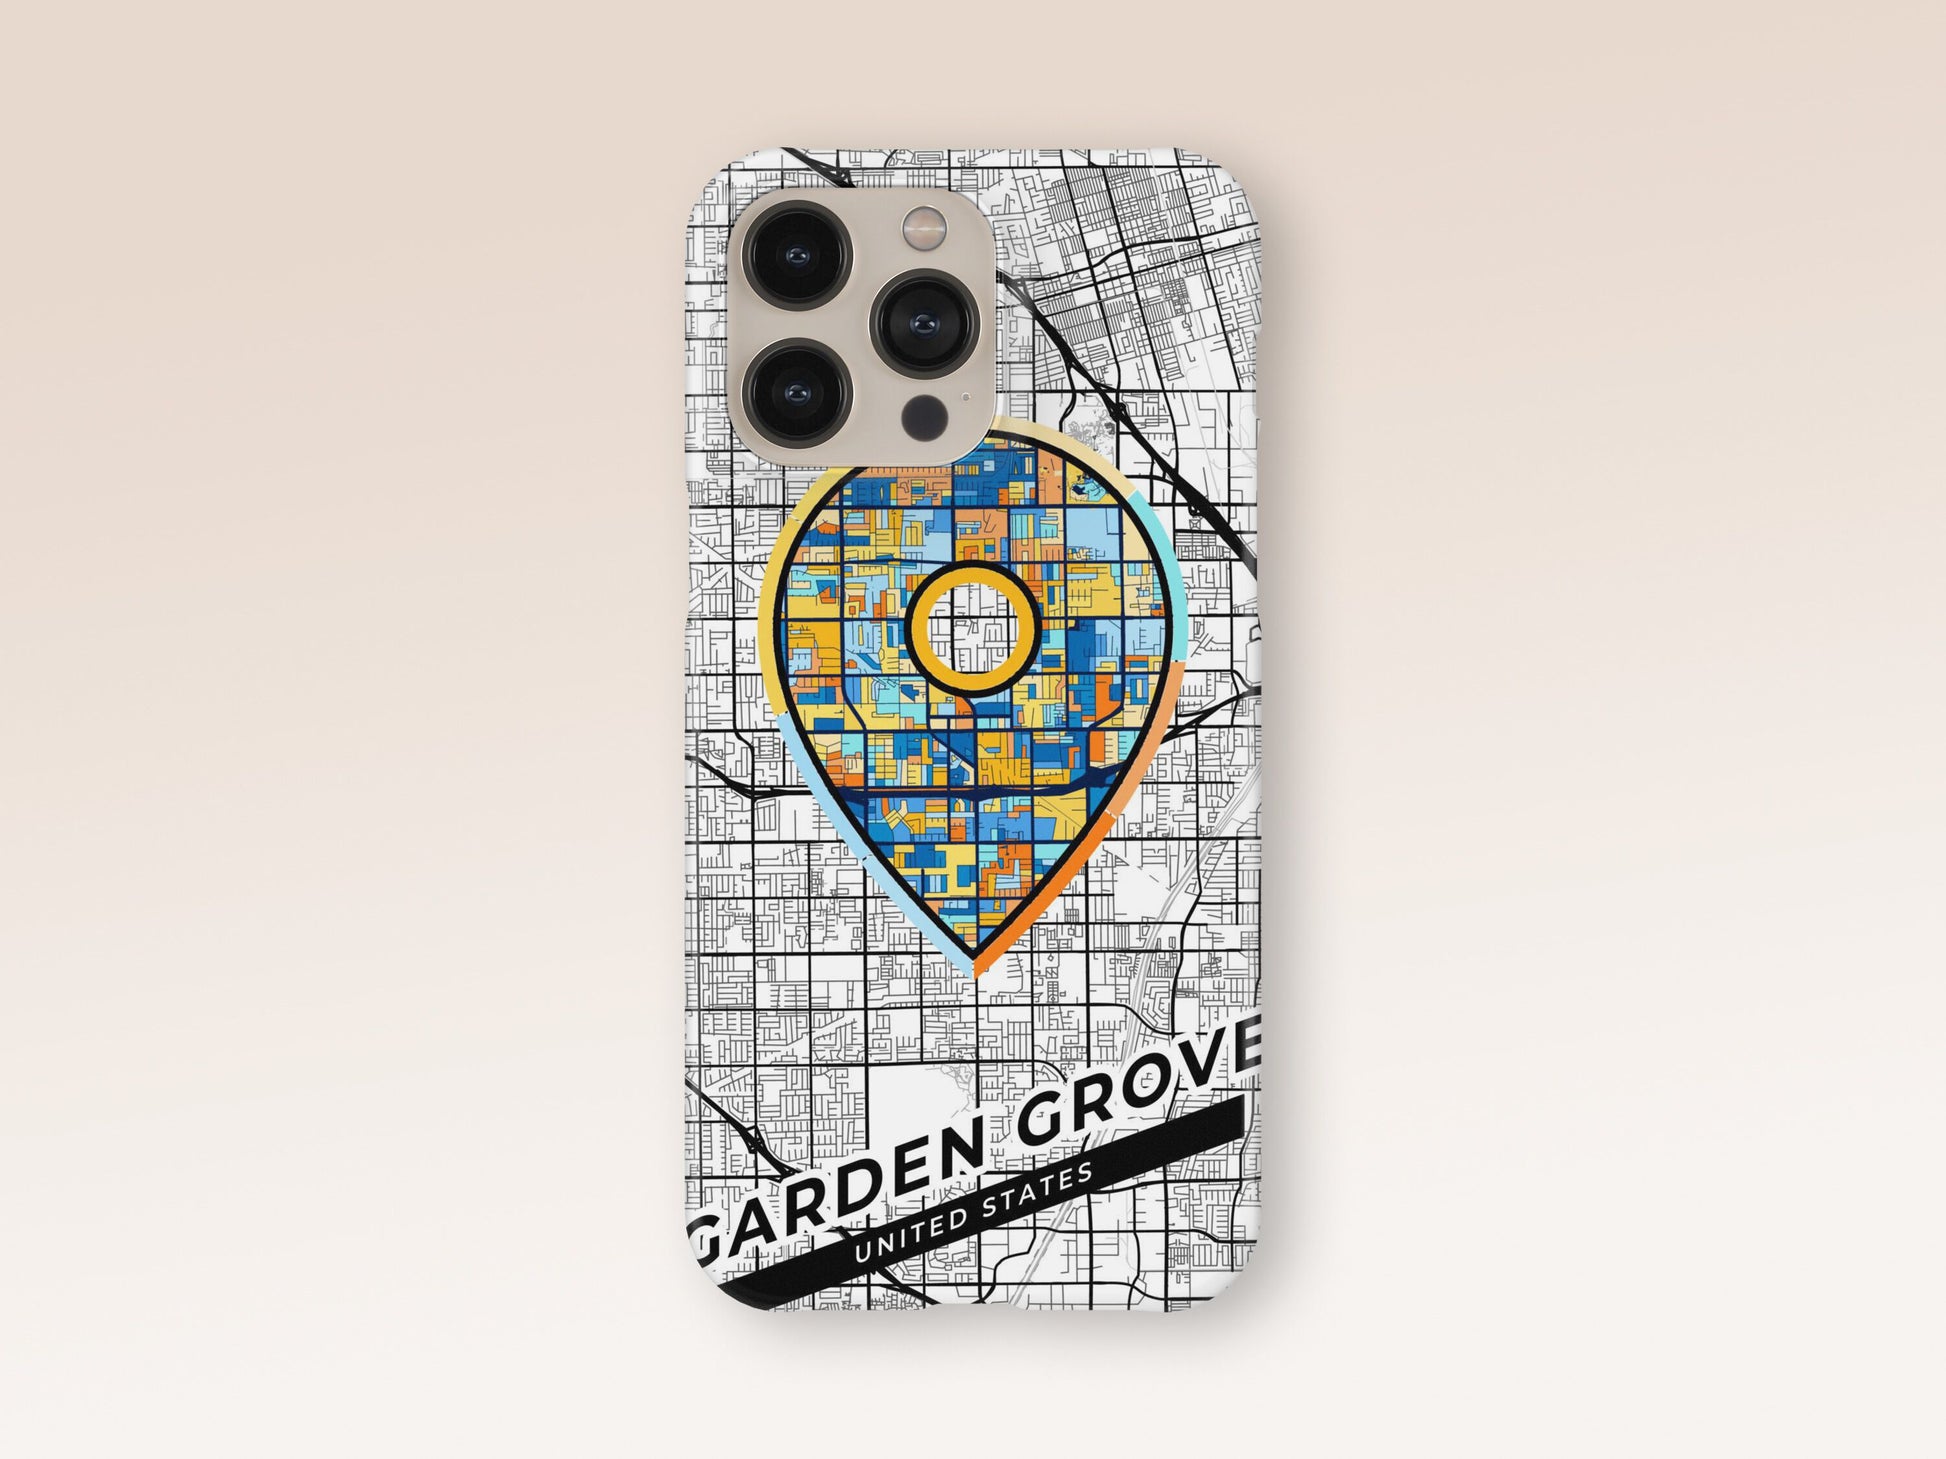 Garden Grove California slim phone case with colorful icon. Birthday, wedding or housewarming gift. Couple match cases. 1